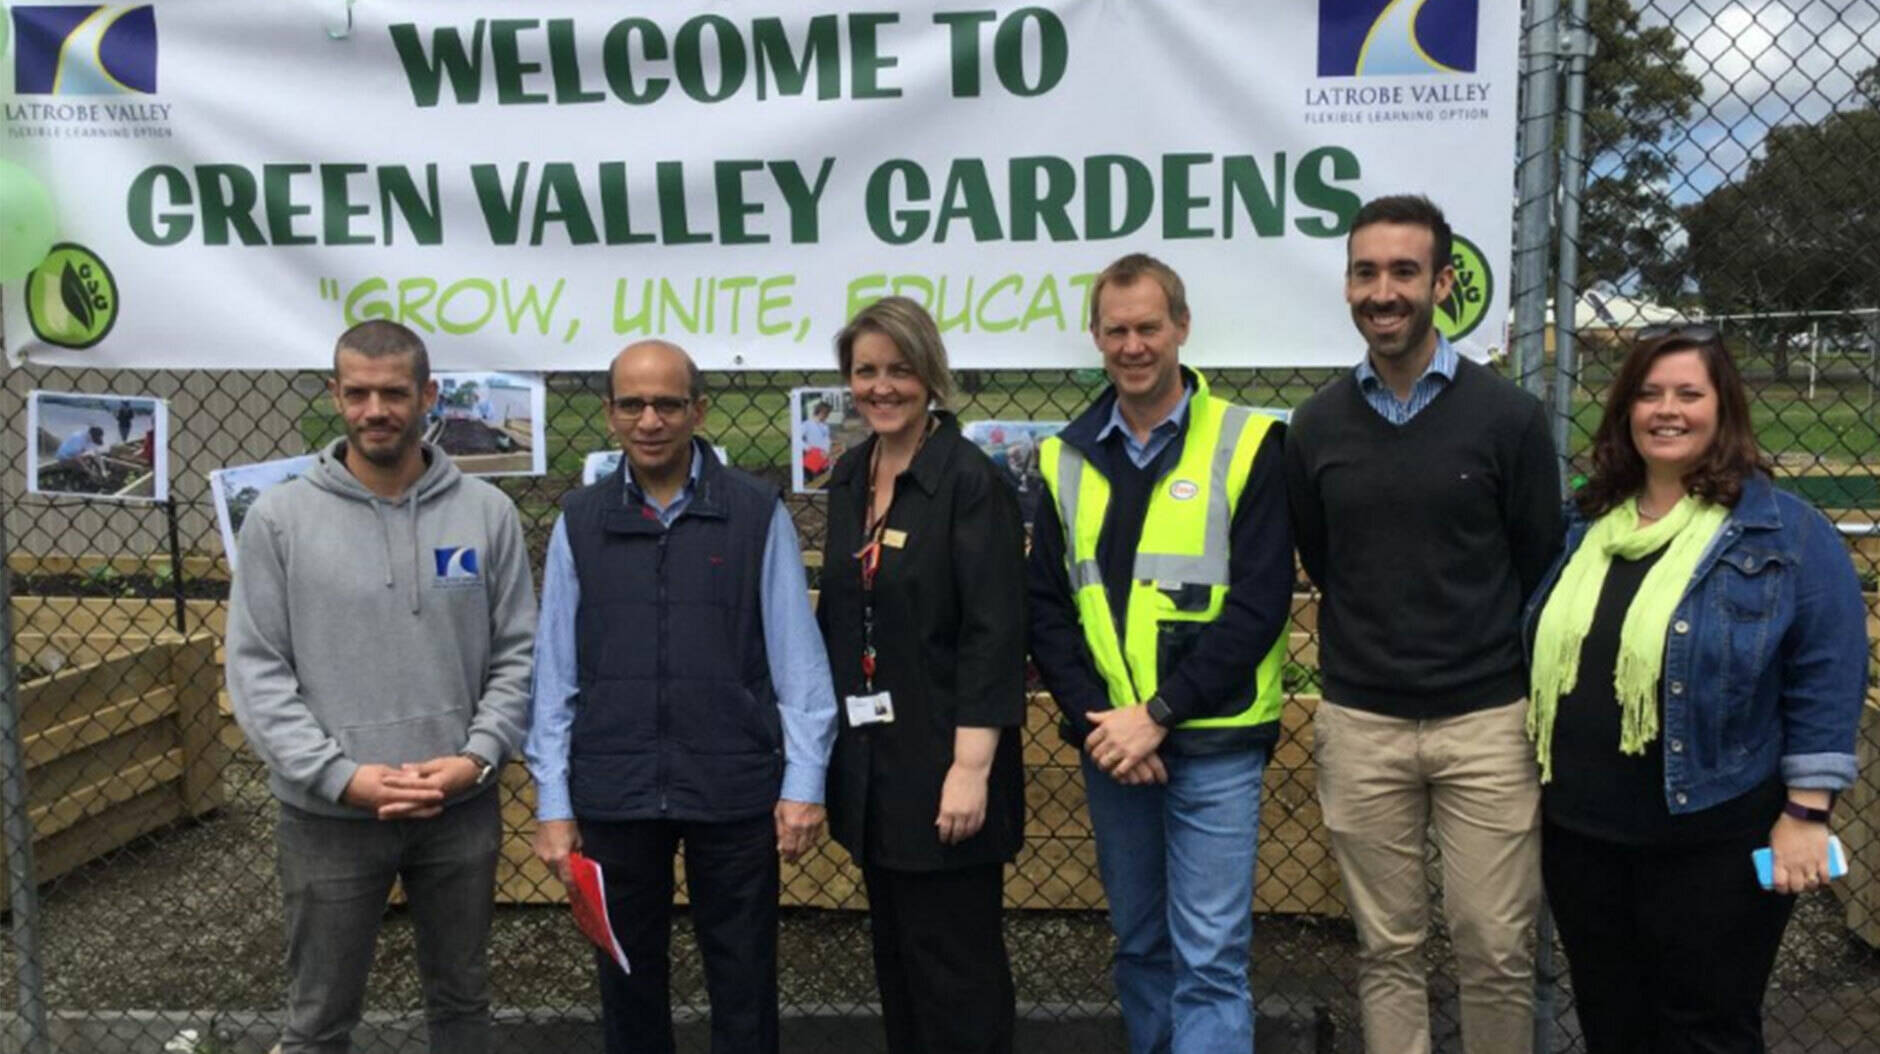 Image Photo  Representatives from Latrobe Valley Flexible Learning Option, Esso, Conservation Volunteers Australia and VicHealth joined Latrobe Valley Mayor, Kellie OCallaghan (centre), in launching the community garden on 31 October 2017.